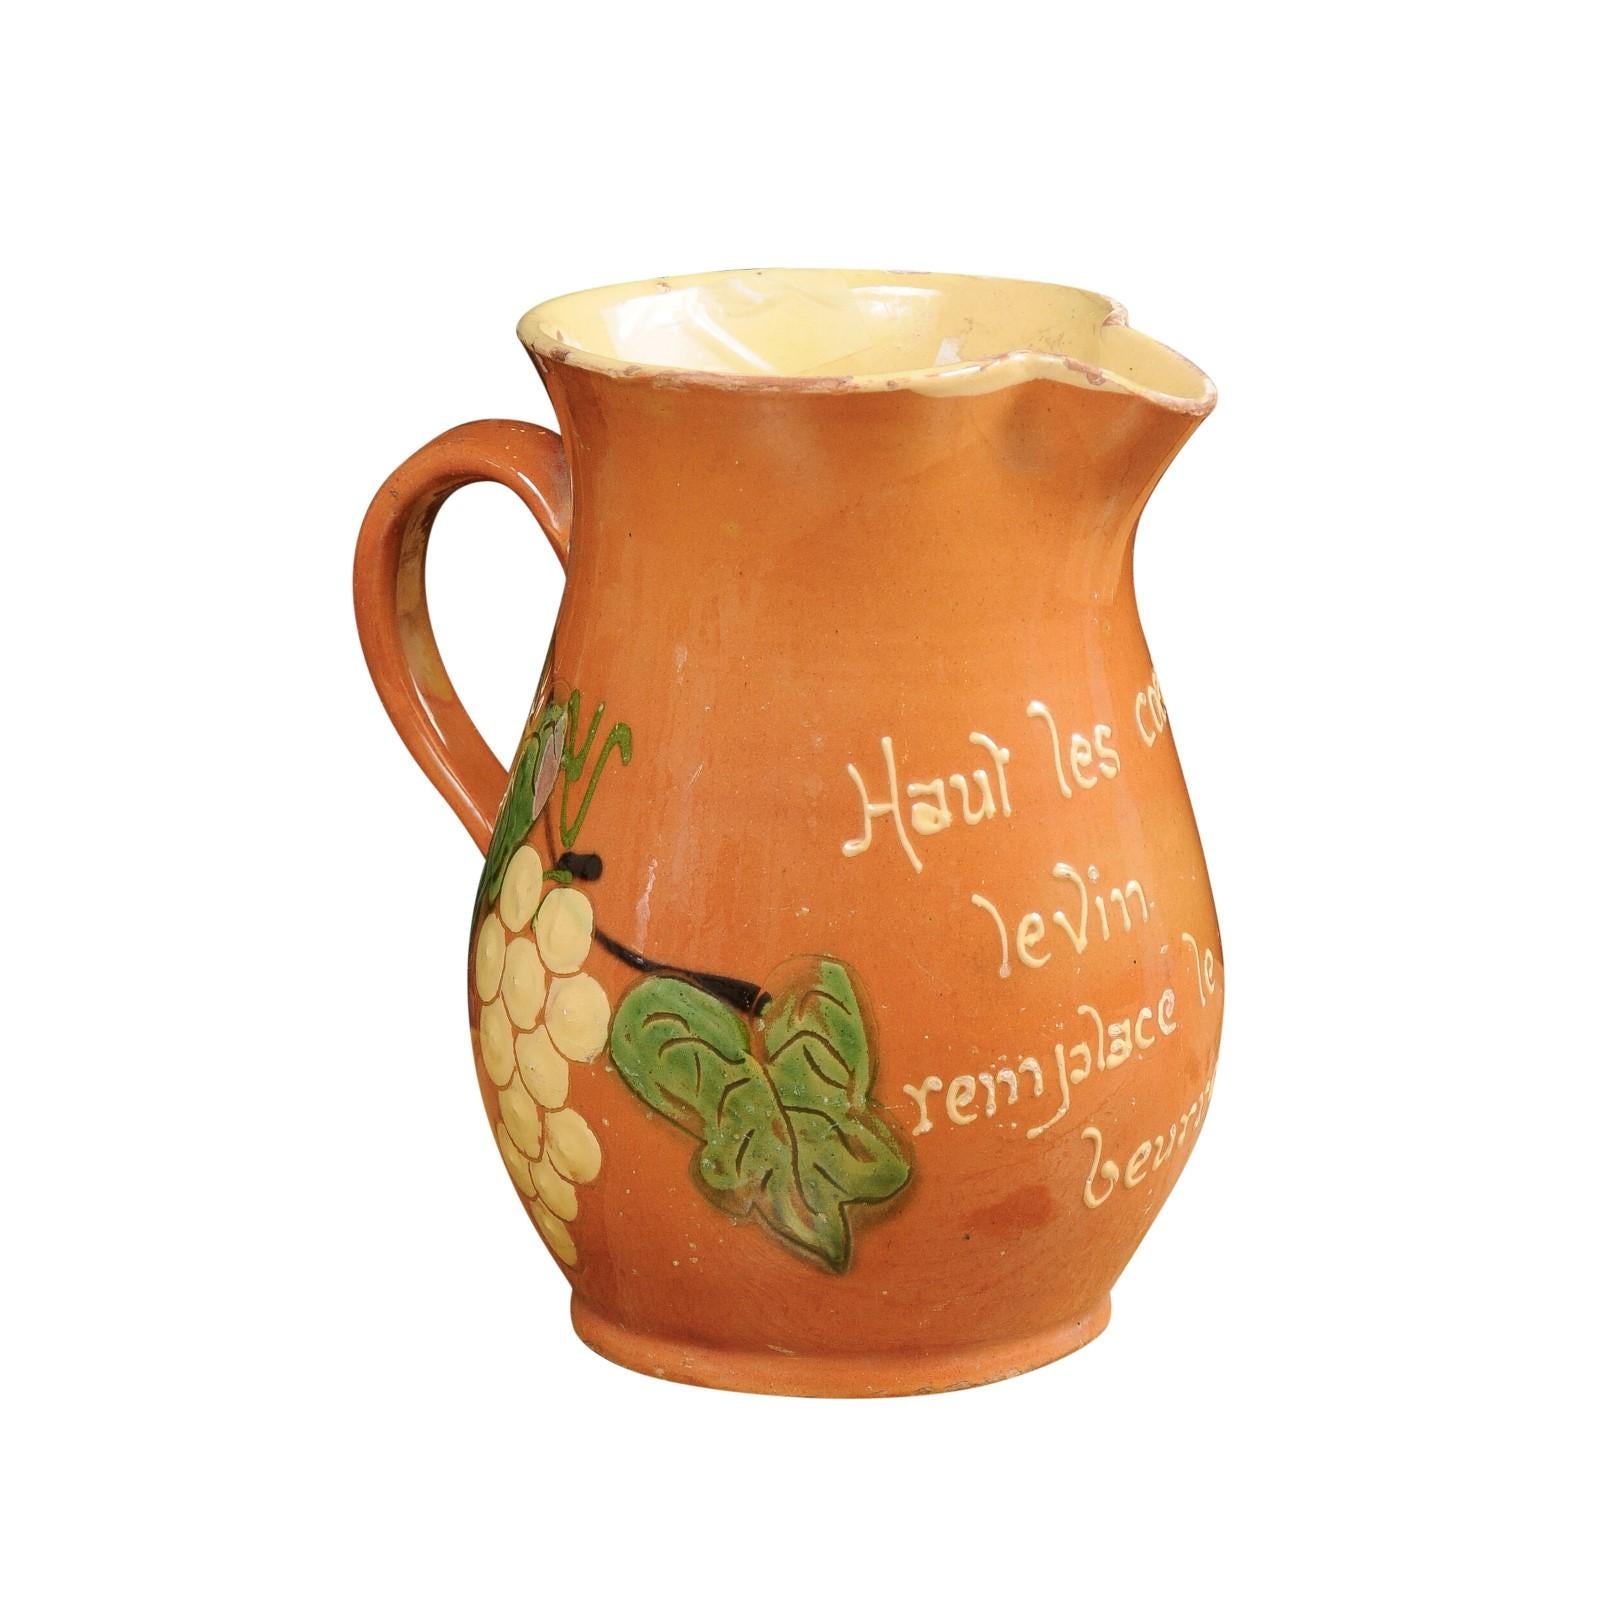 One French redware wine pitcher from the 19th century, with orange, cream, green glaze and grape motifs. Created in France during the 19th century, each of this pair of redware pitchers charms us with its vivid colors perfectly accented with grape